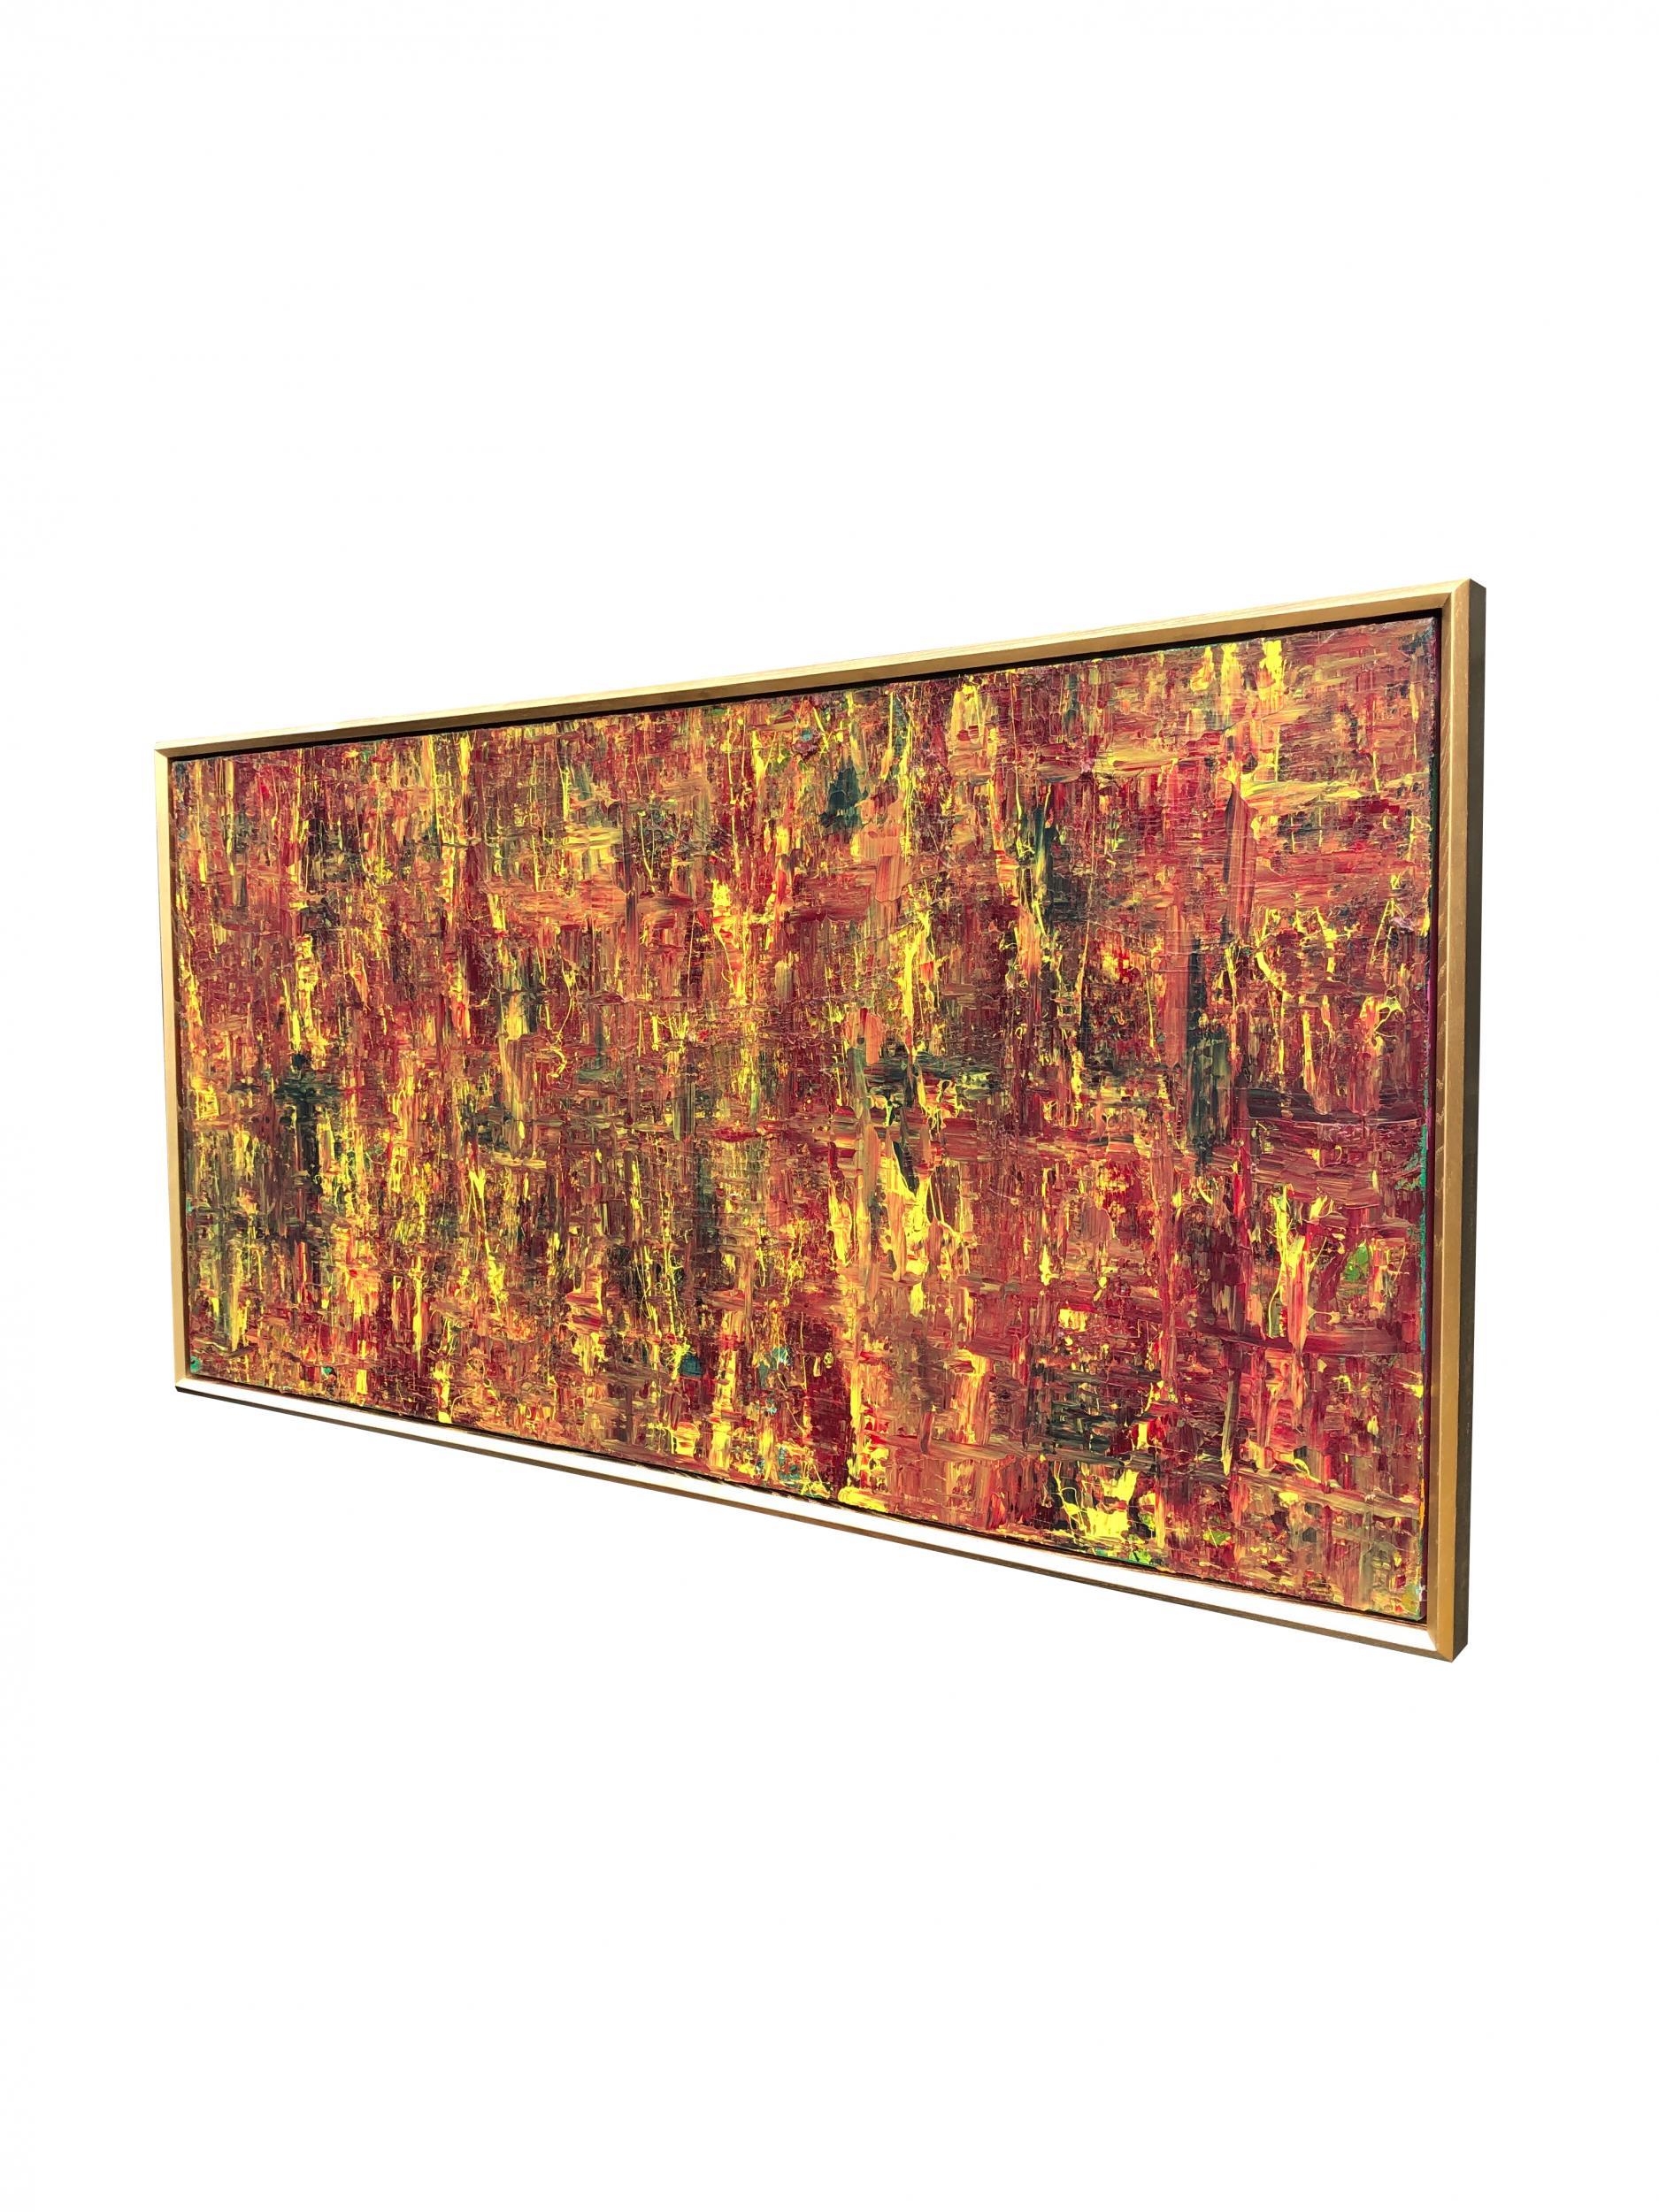 Memories By Troy Smith With Gilt Frame Fine Art Abstract Art For Sale 4